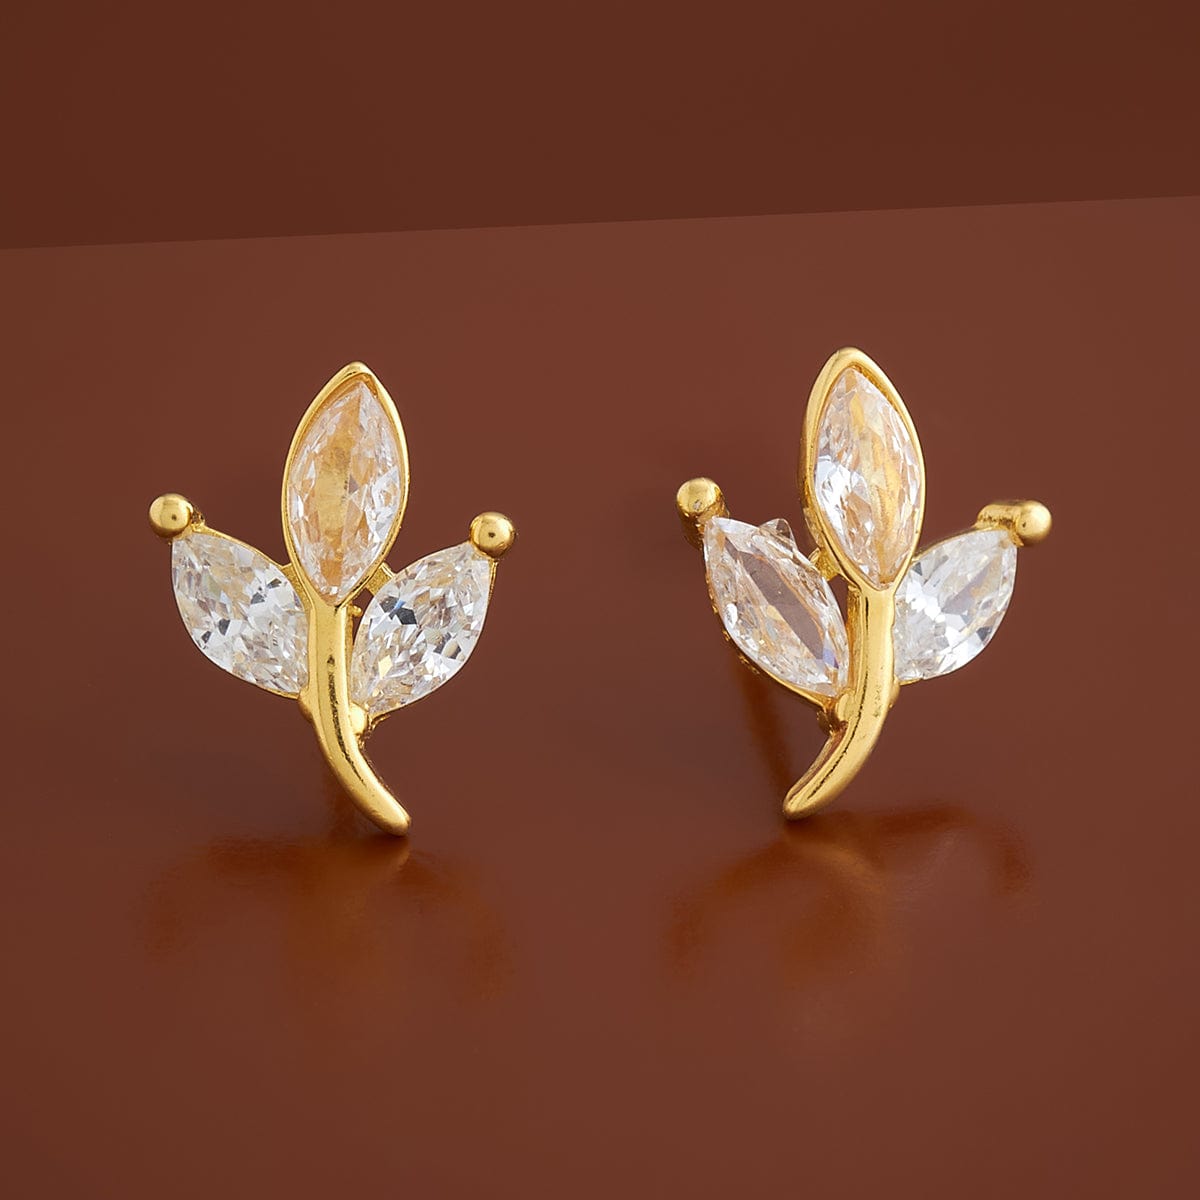 Design Sense Three-Dimensional Cross X Micro Inlaid Zircon Gold Earrings  Simple Jewelry For Woman Girl Party Luxury Accessories - AliExpress